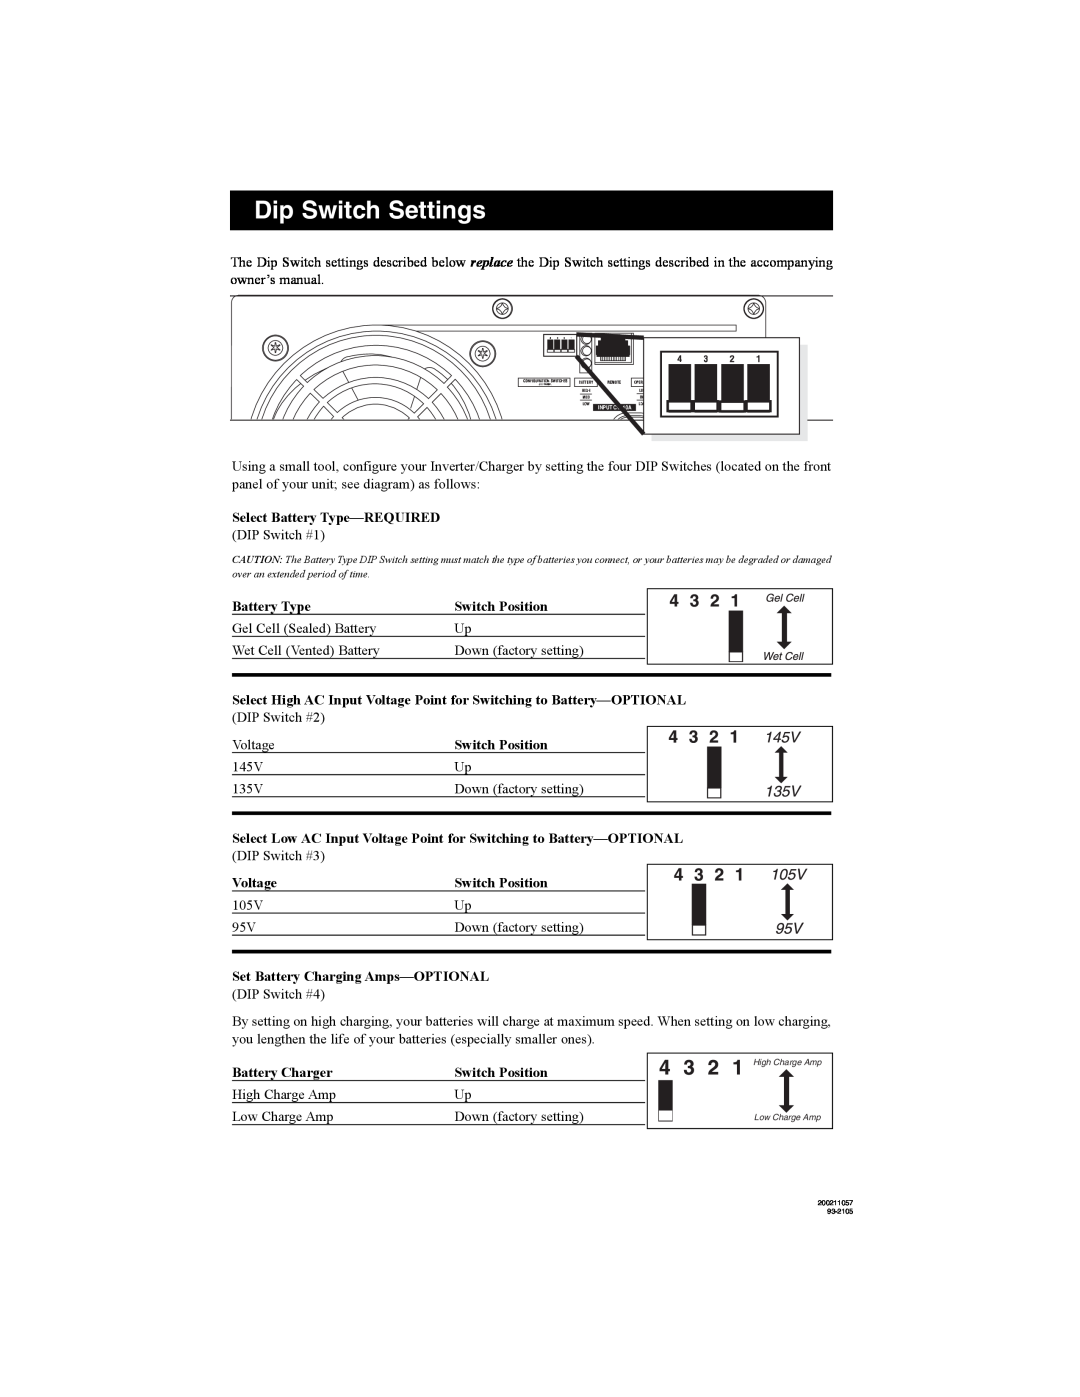 Tripp Lite Power Inverters owner manual Dip Switch Settings, High Charge Amp Low Charge Amp 